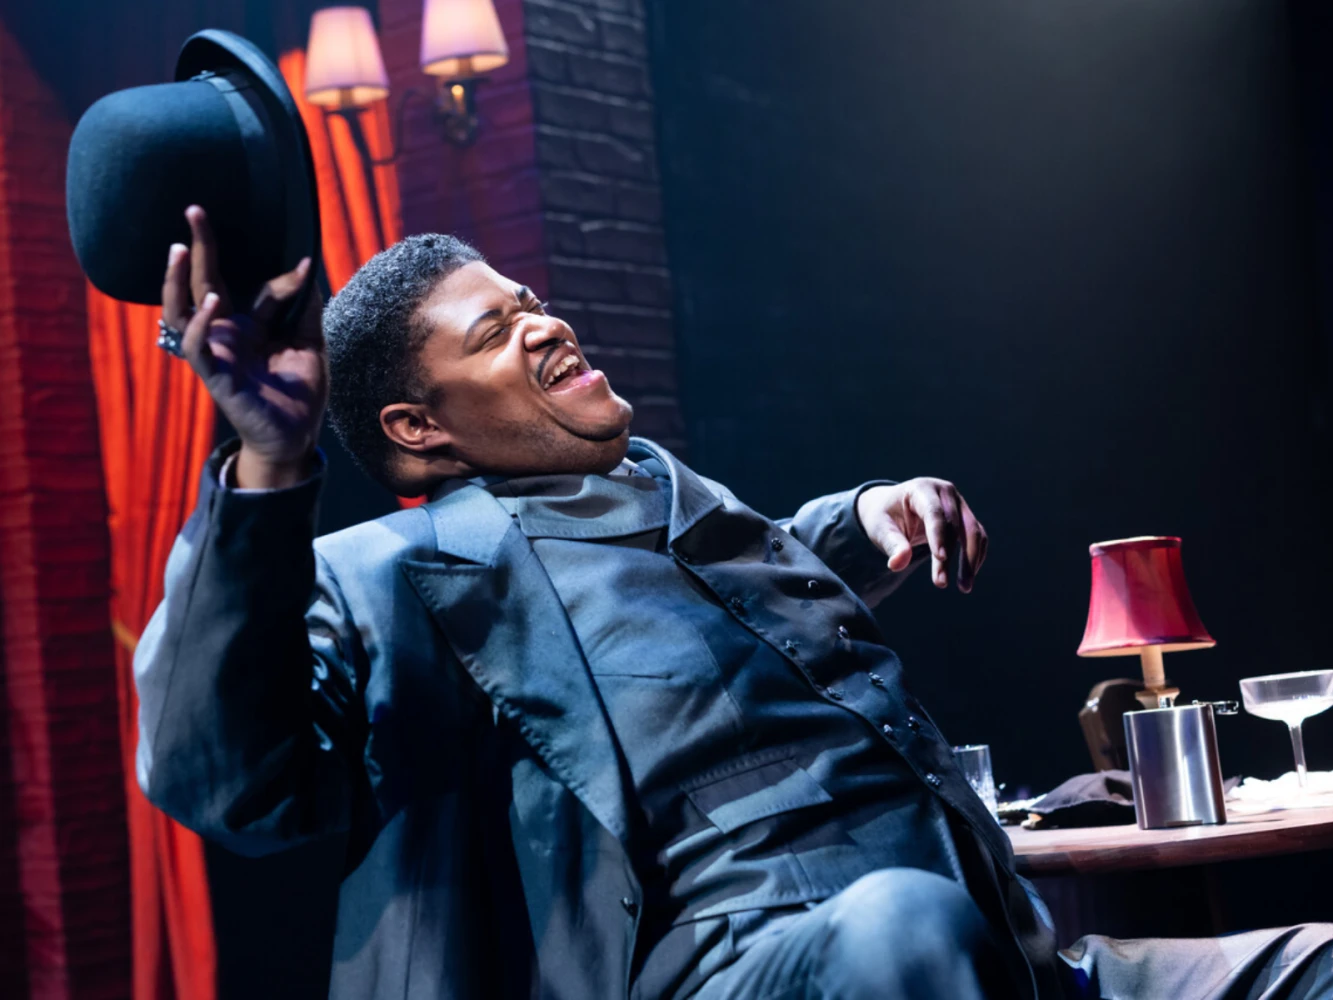 Ain't Misbehavin': What to expect - 4